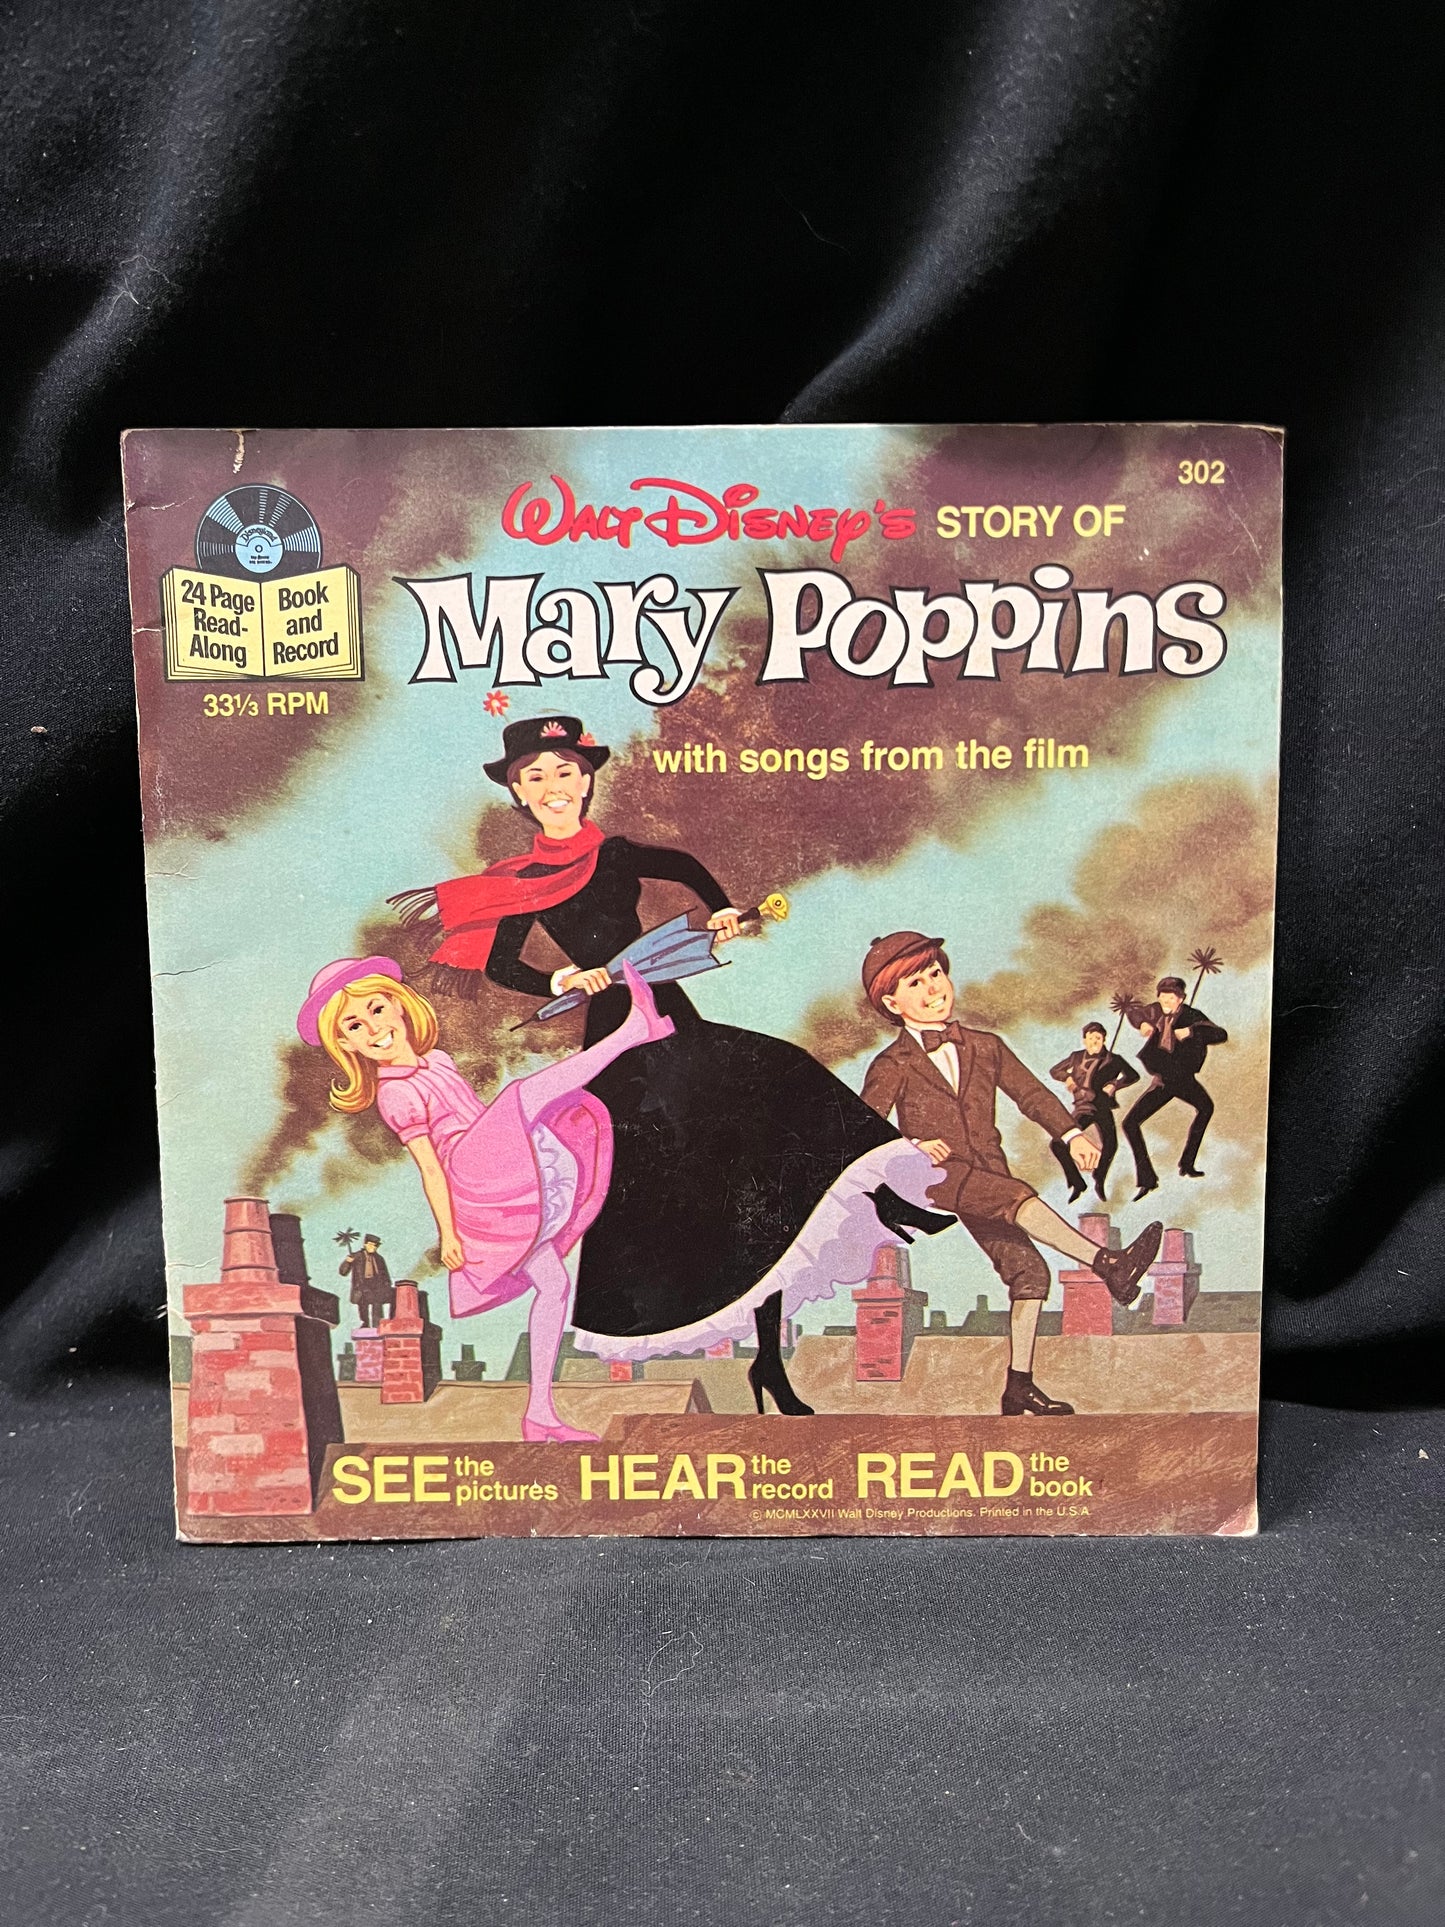 Walt Disney's Story of Mary Poppins - Read Along Book and Record